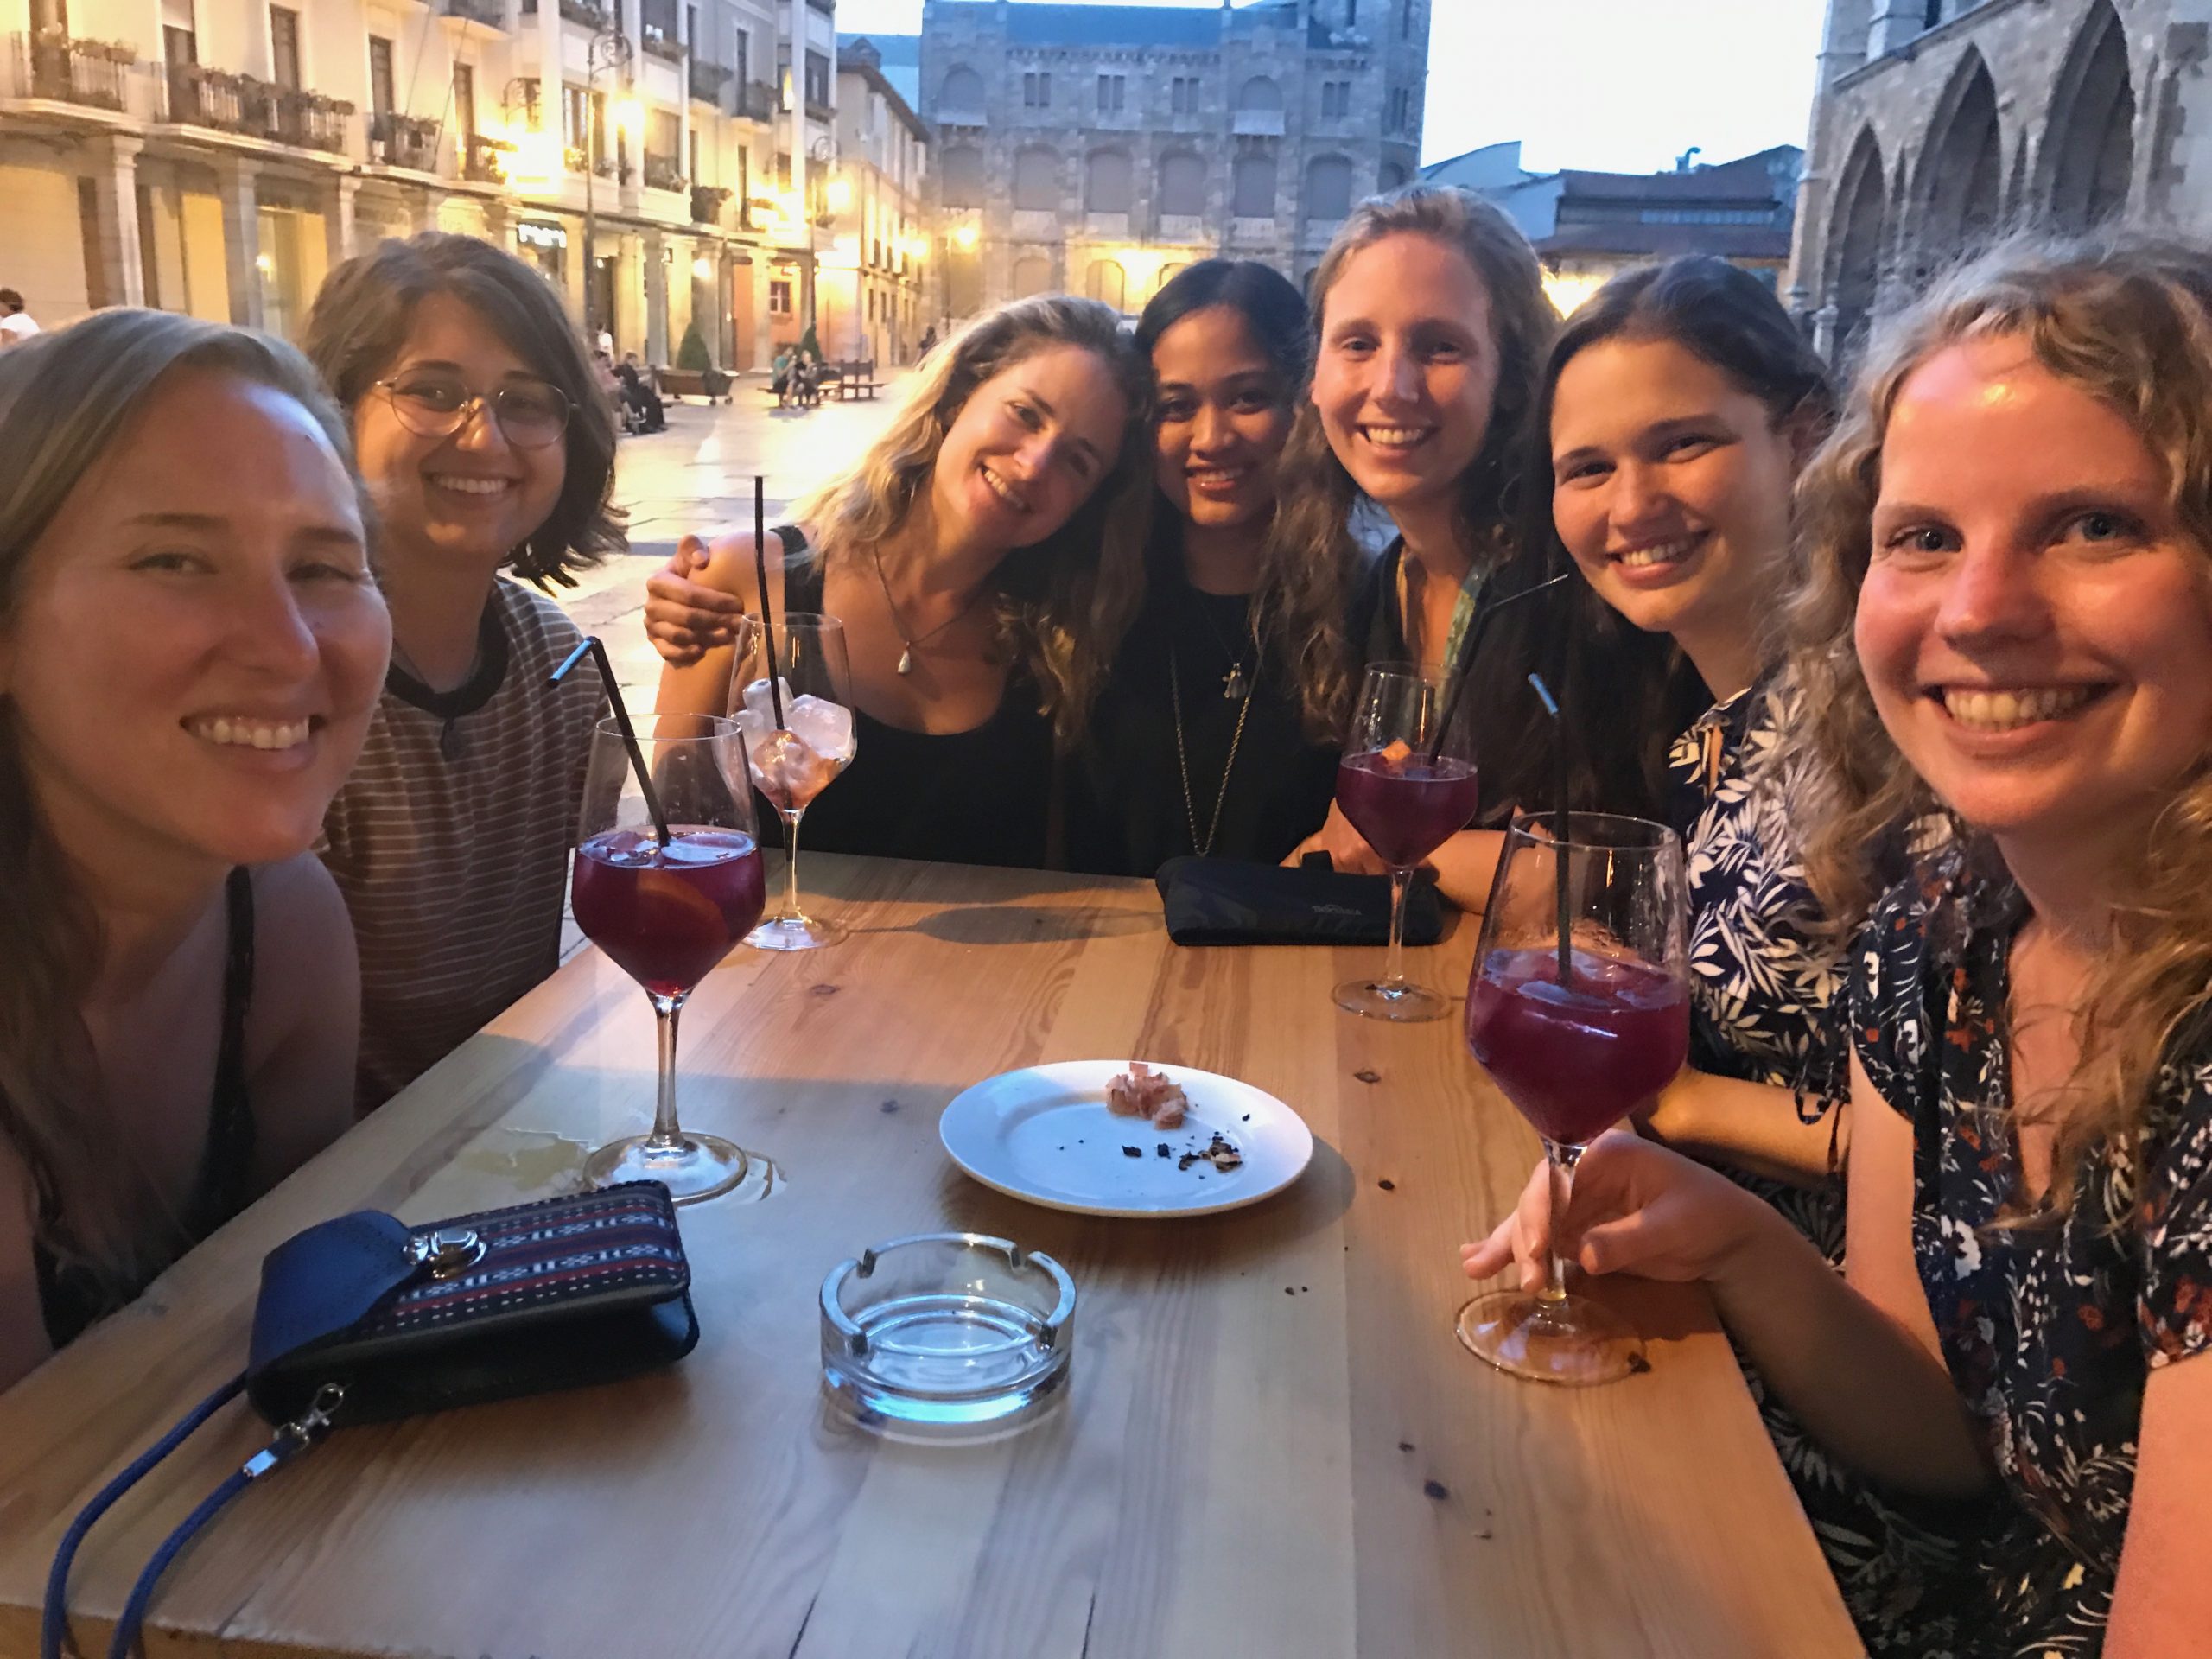 A group pf women drinking Sangria in Leon, Spain on the Camino De Santiago